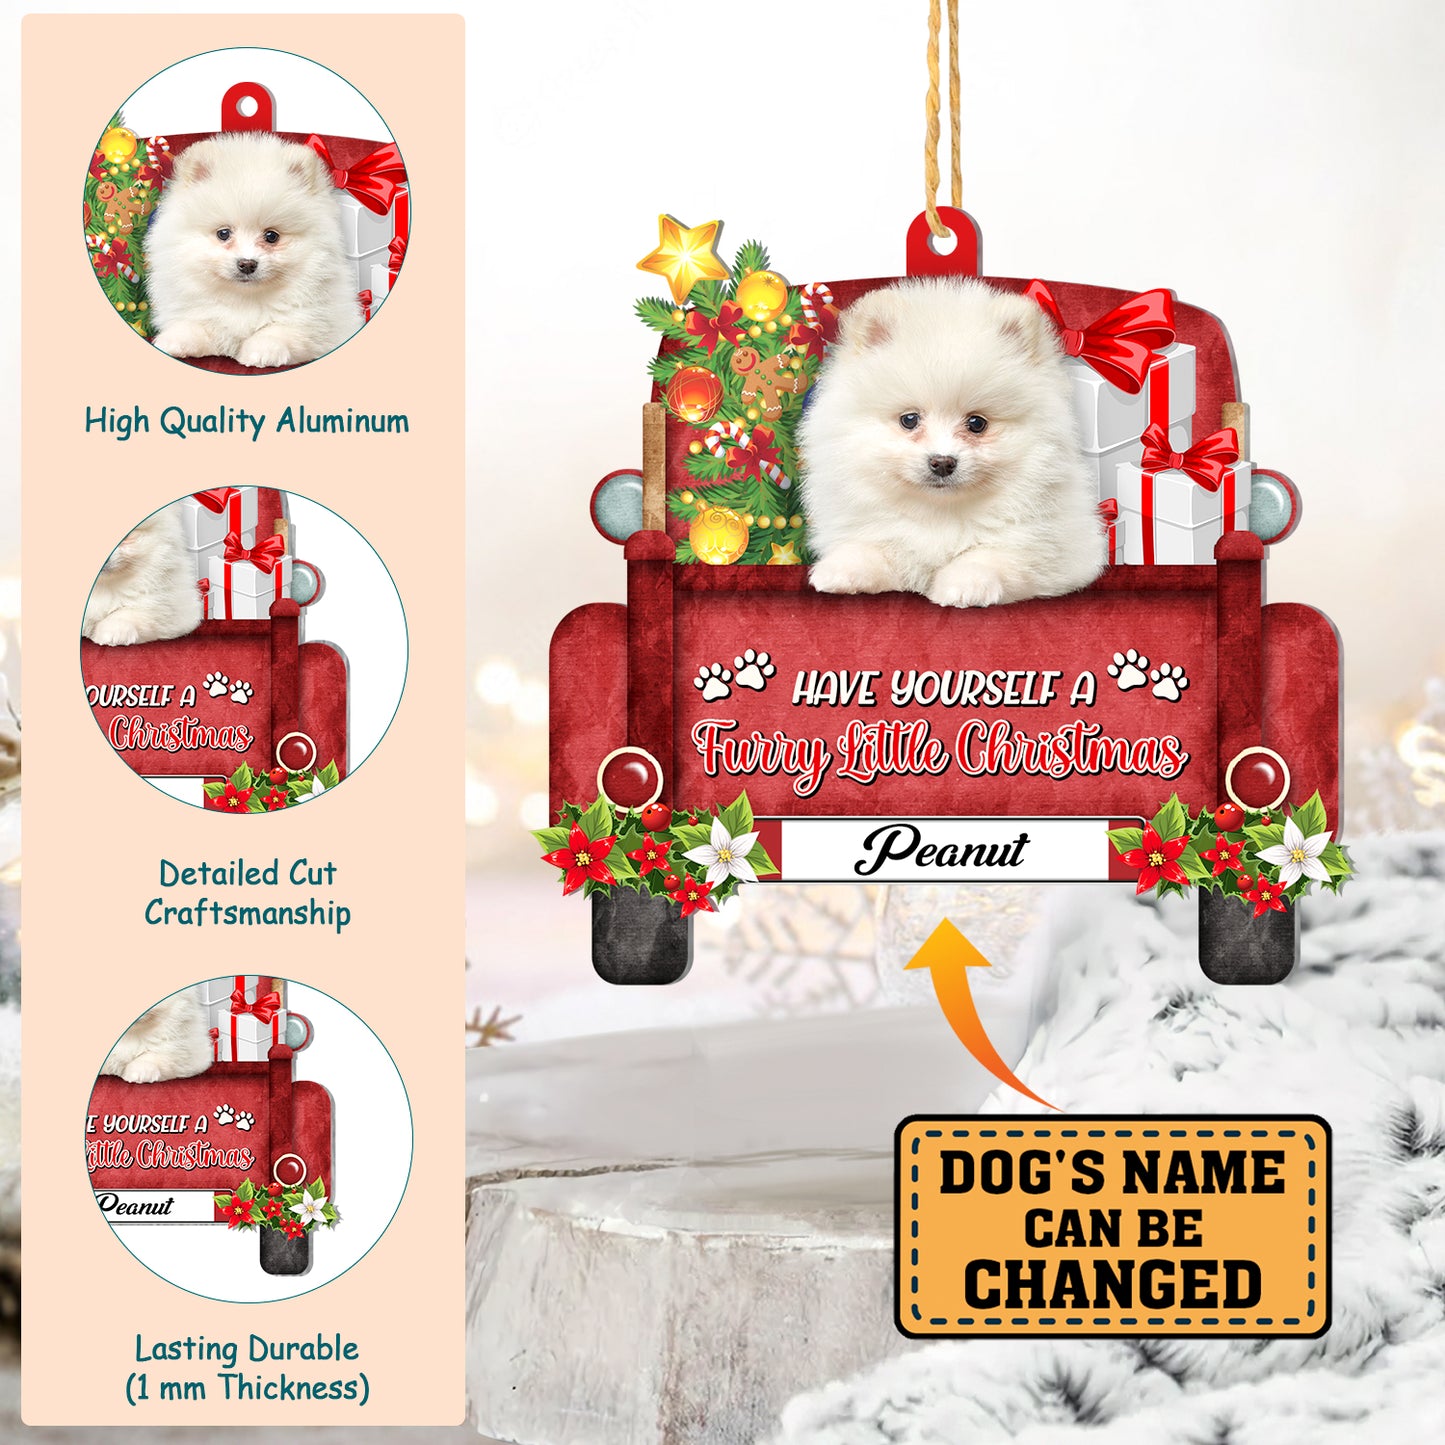 Personalized White Pomeranian Red Truck Christmas Aluminum Ornament